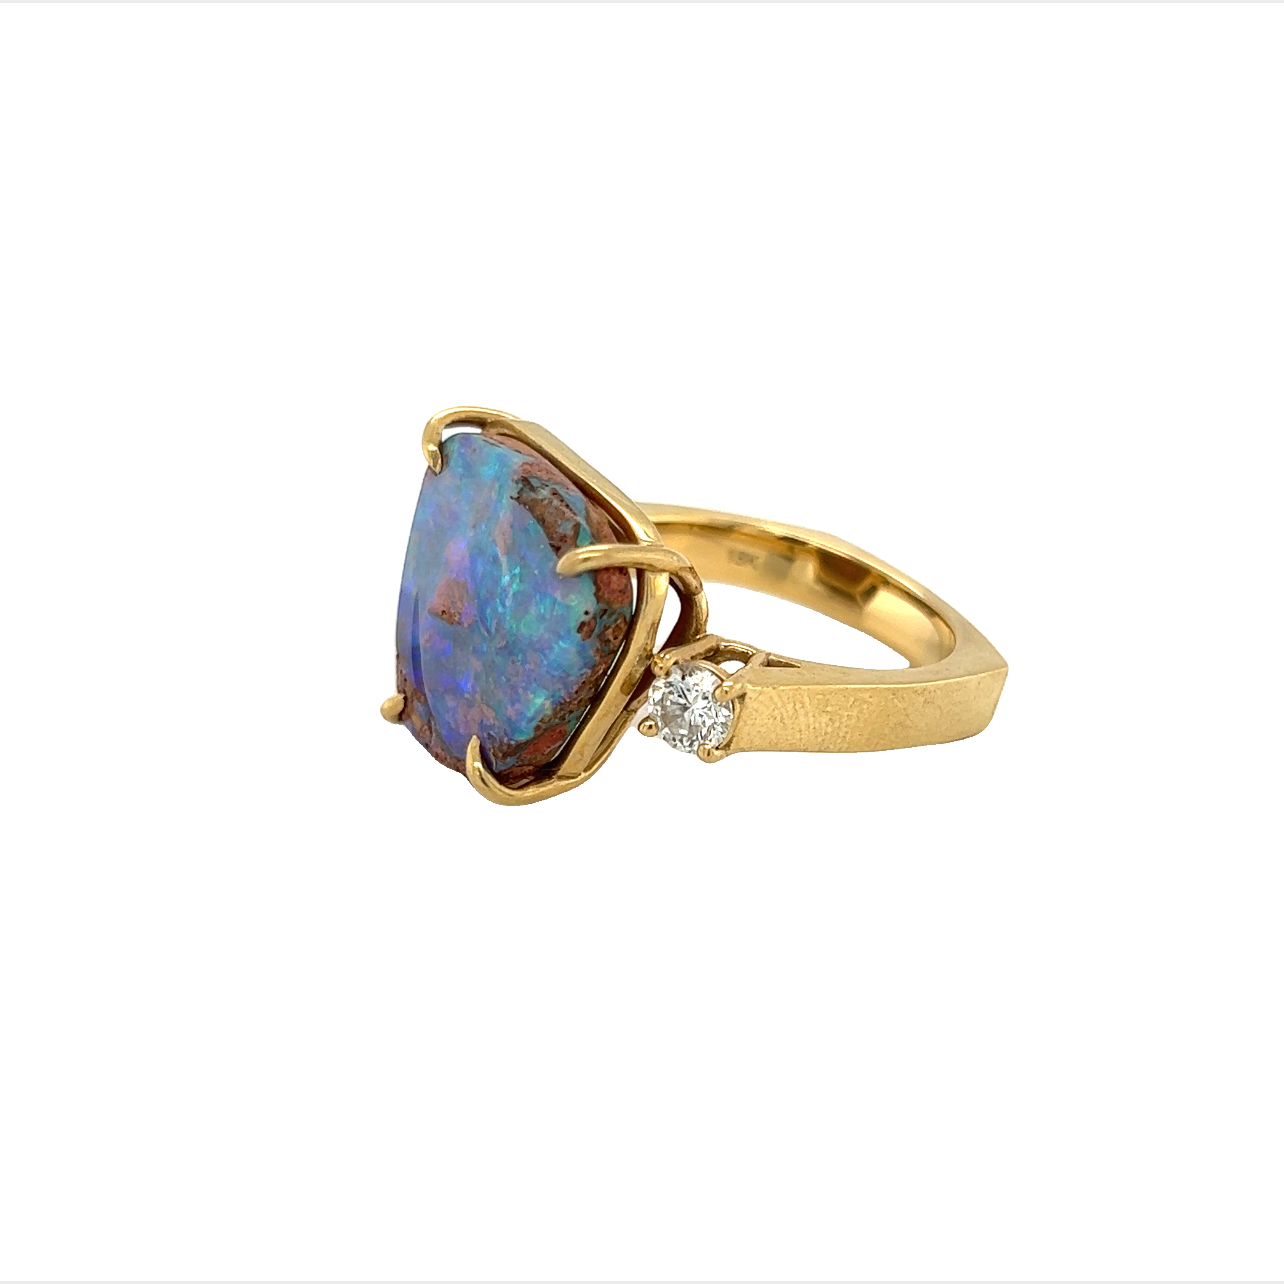 Featured image for “Unbelievable Australian Opal Ring”